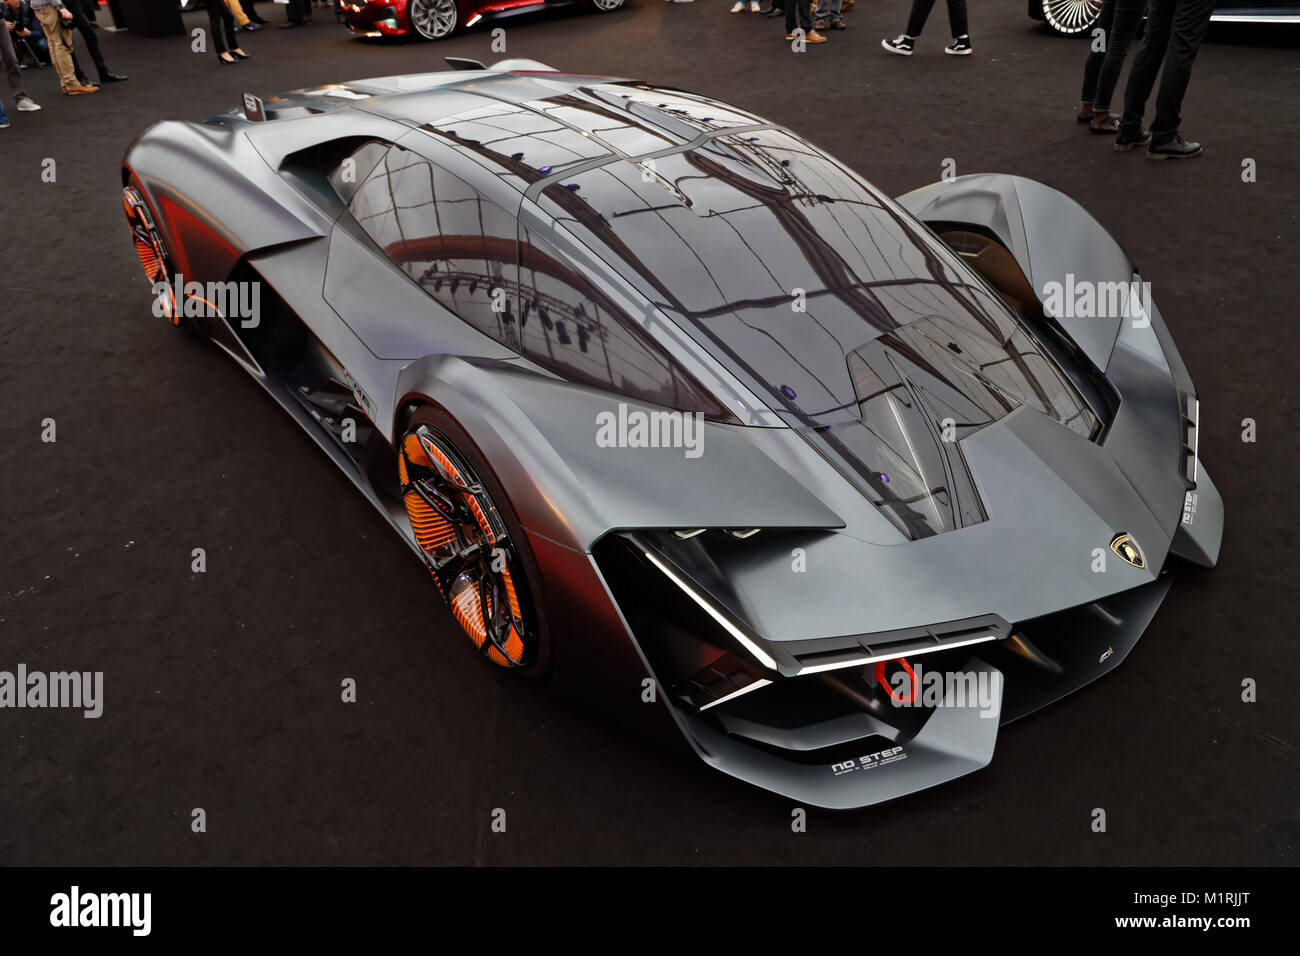 Paris, France. 31st January, 2018. LAMBORGHINI TERZO MILLENNIO - The International Automobile Festival brings together in Paris the most beautiful concept cars made by car manufacturers, from January 31 to February 4, 2018. Credit: Bernard Menigault/Alamy Live News Stock Photo